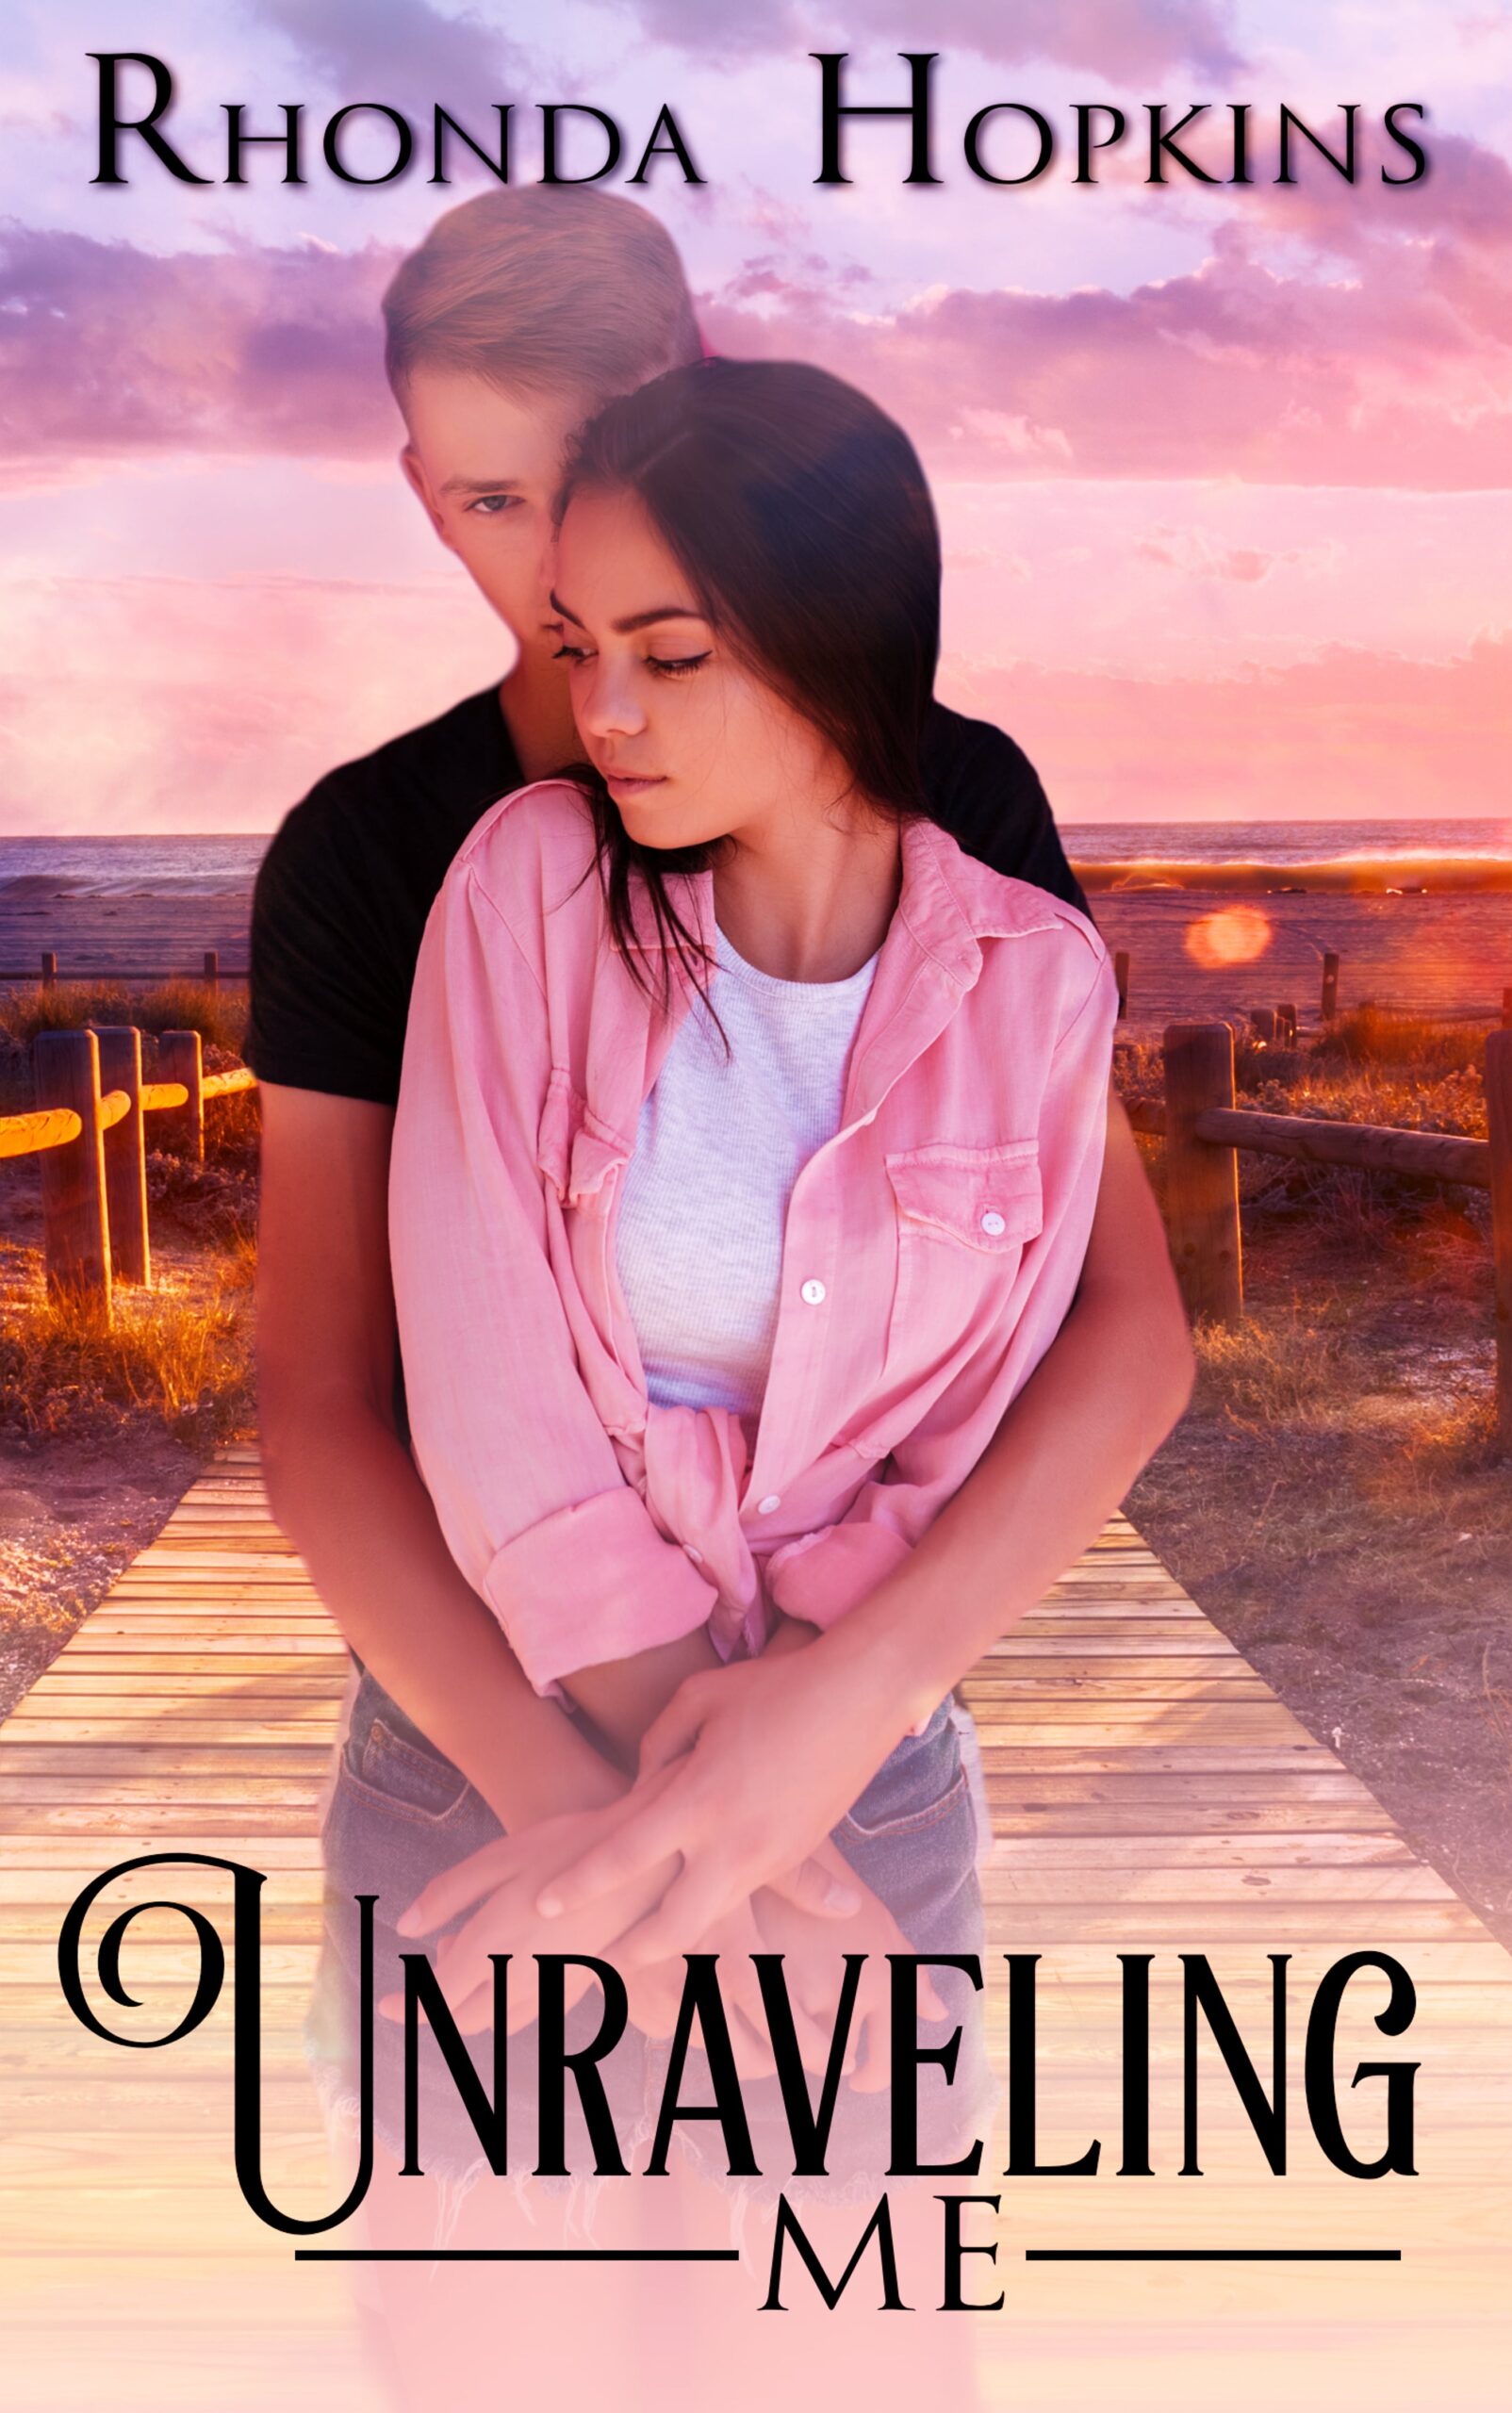 Unraveling Me by Rhonda Hopkins. Cover has a young couple embracing on a pier.